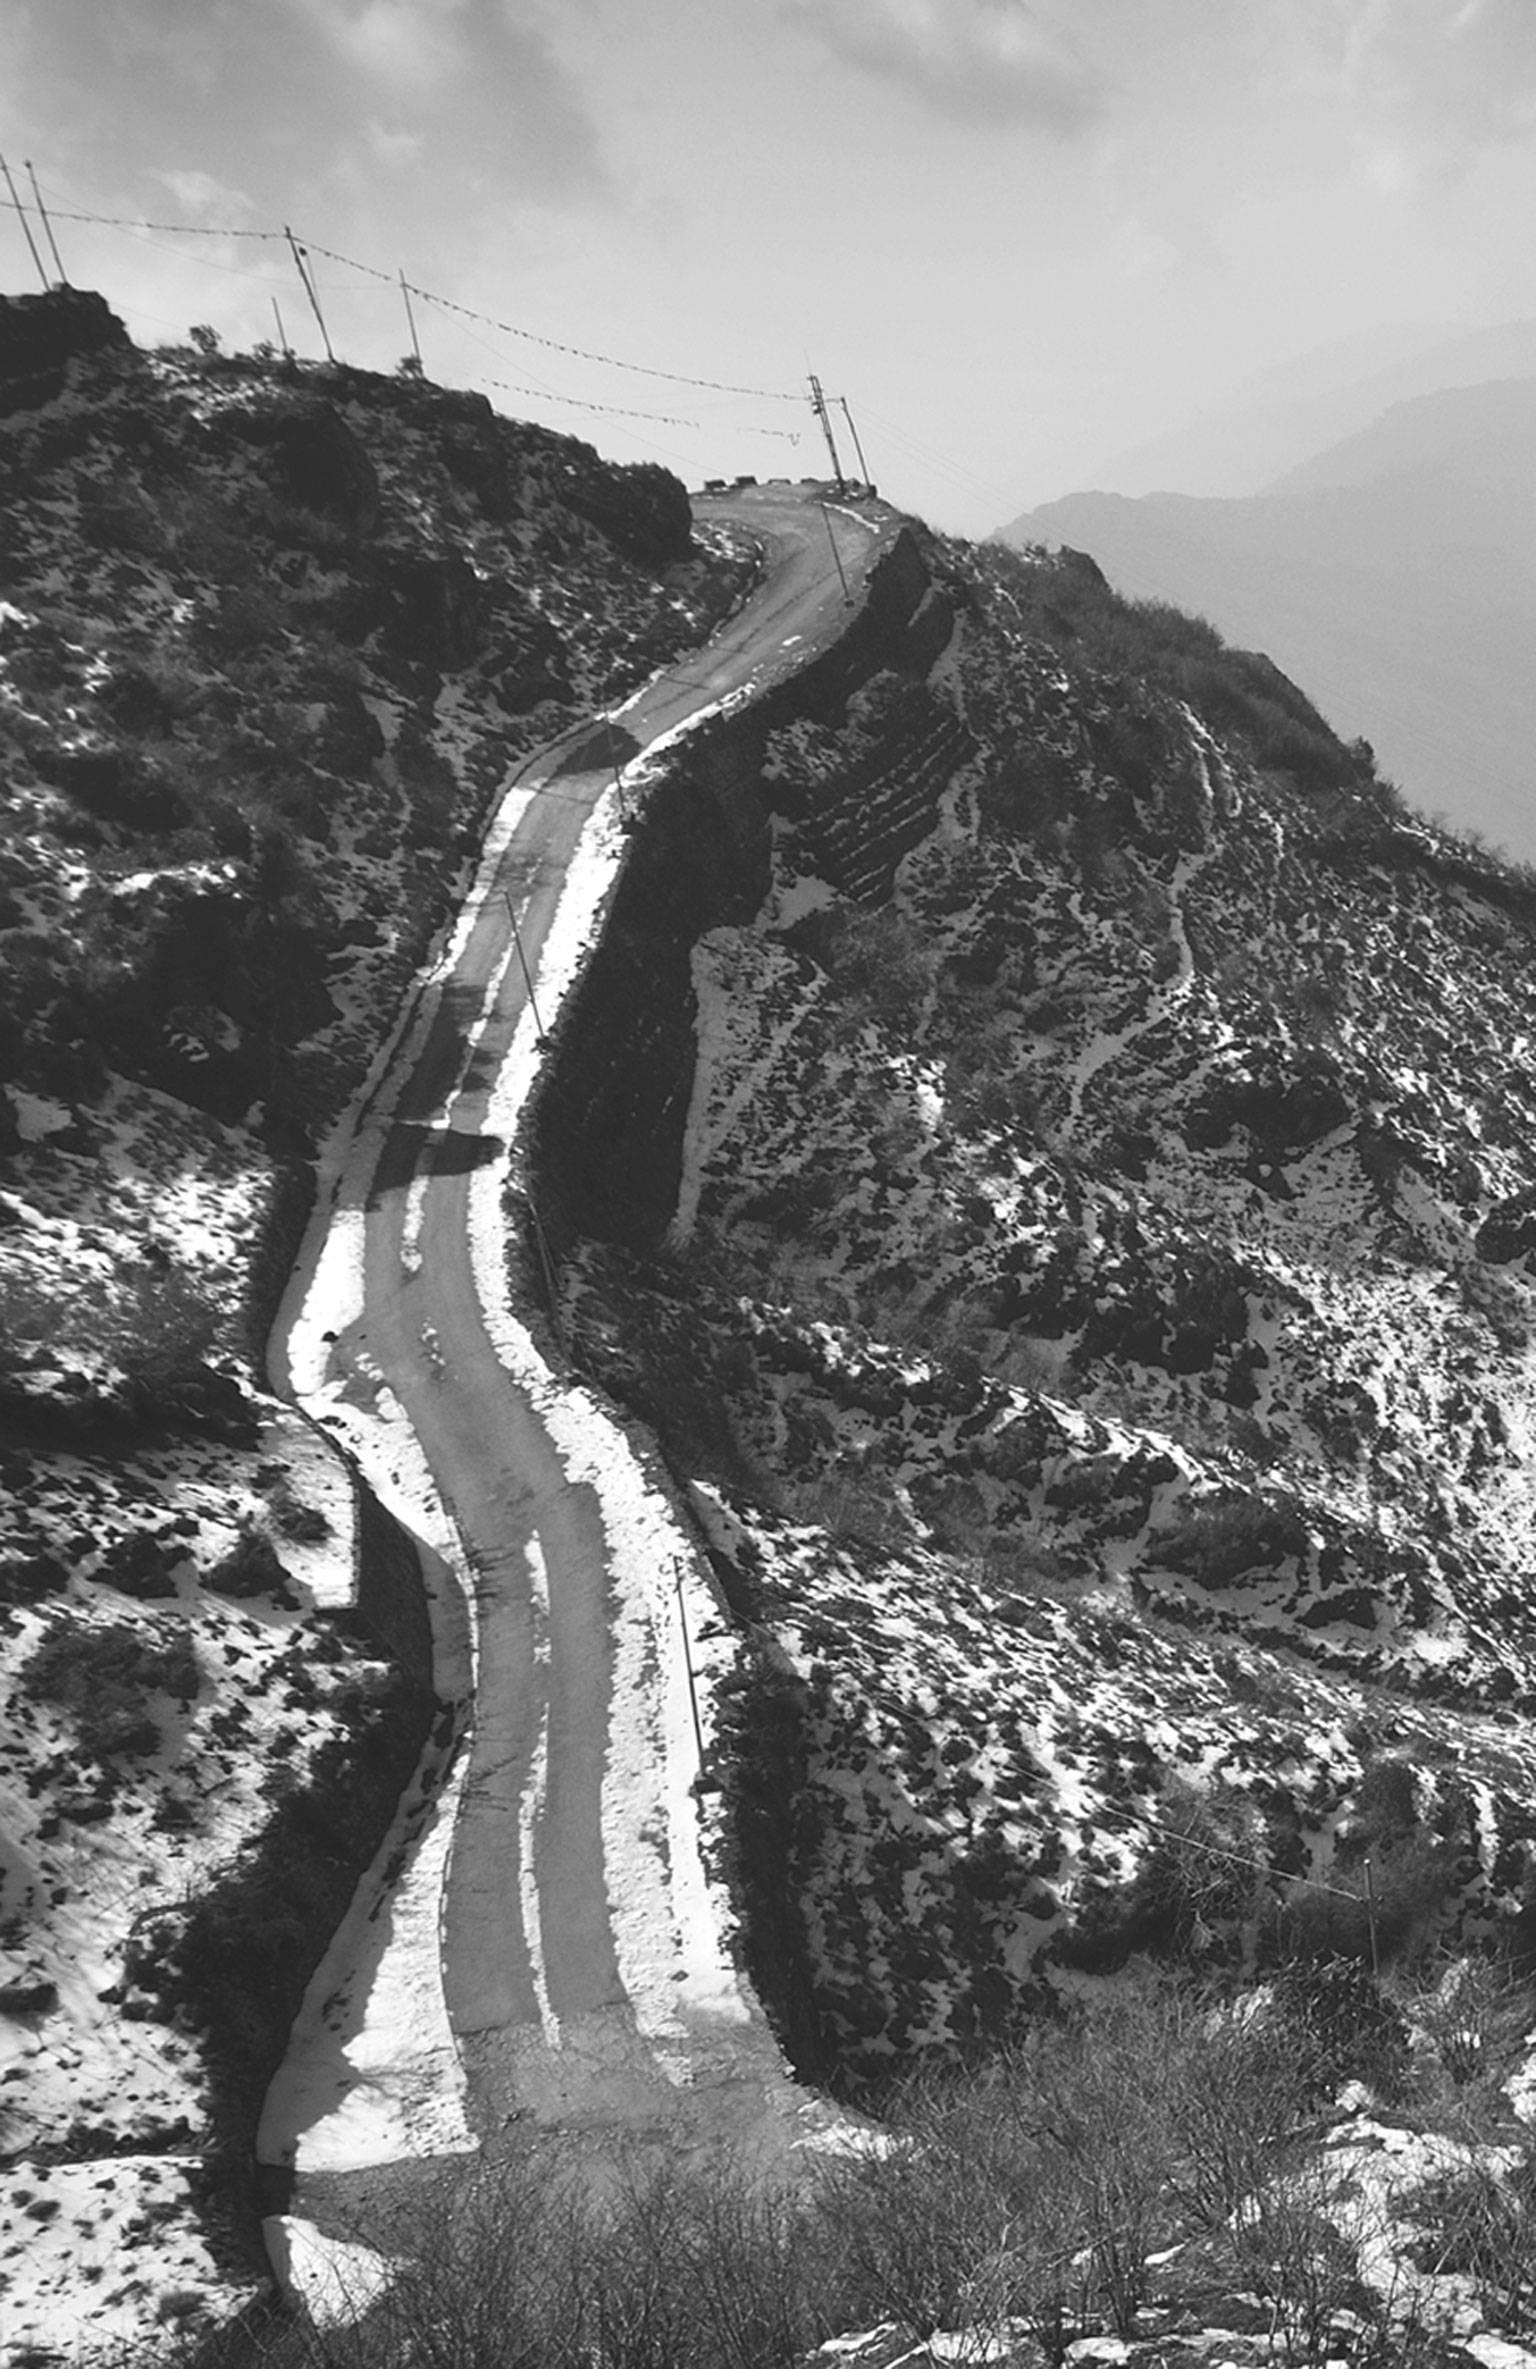 Hilly Roads Scene, Black and White Photography by Indian Artist 